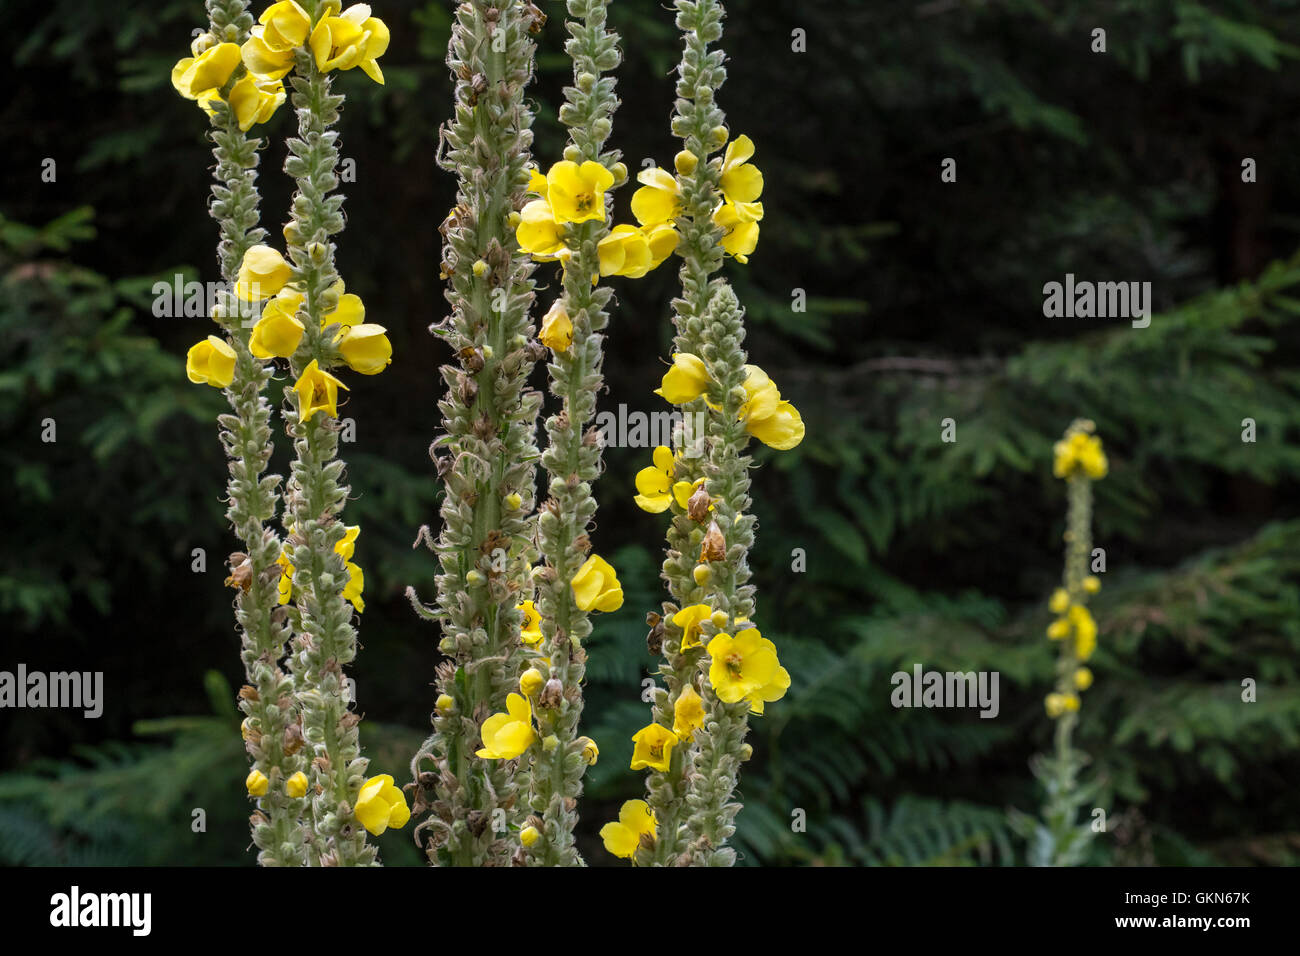 Great mullein / common mullein (Verbascum thapsus) in flower Stock Photo